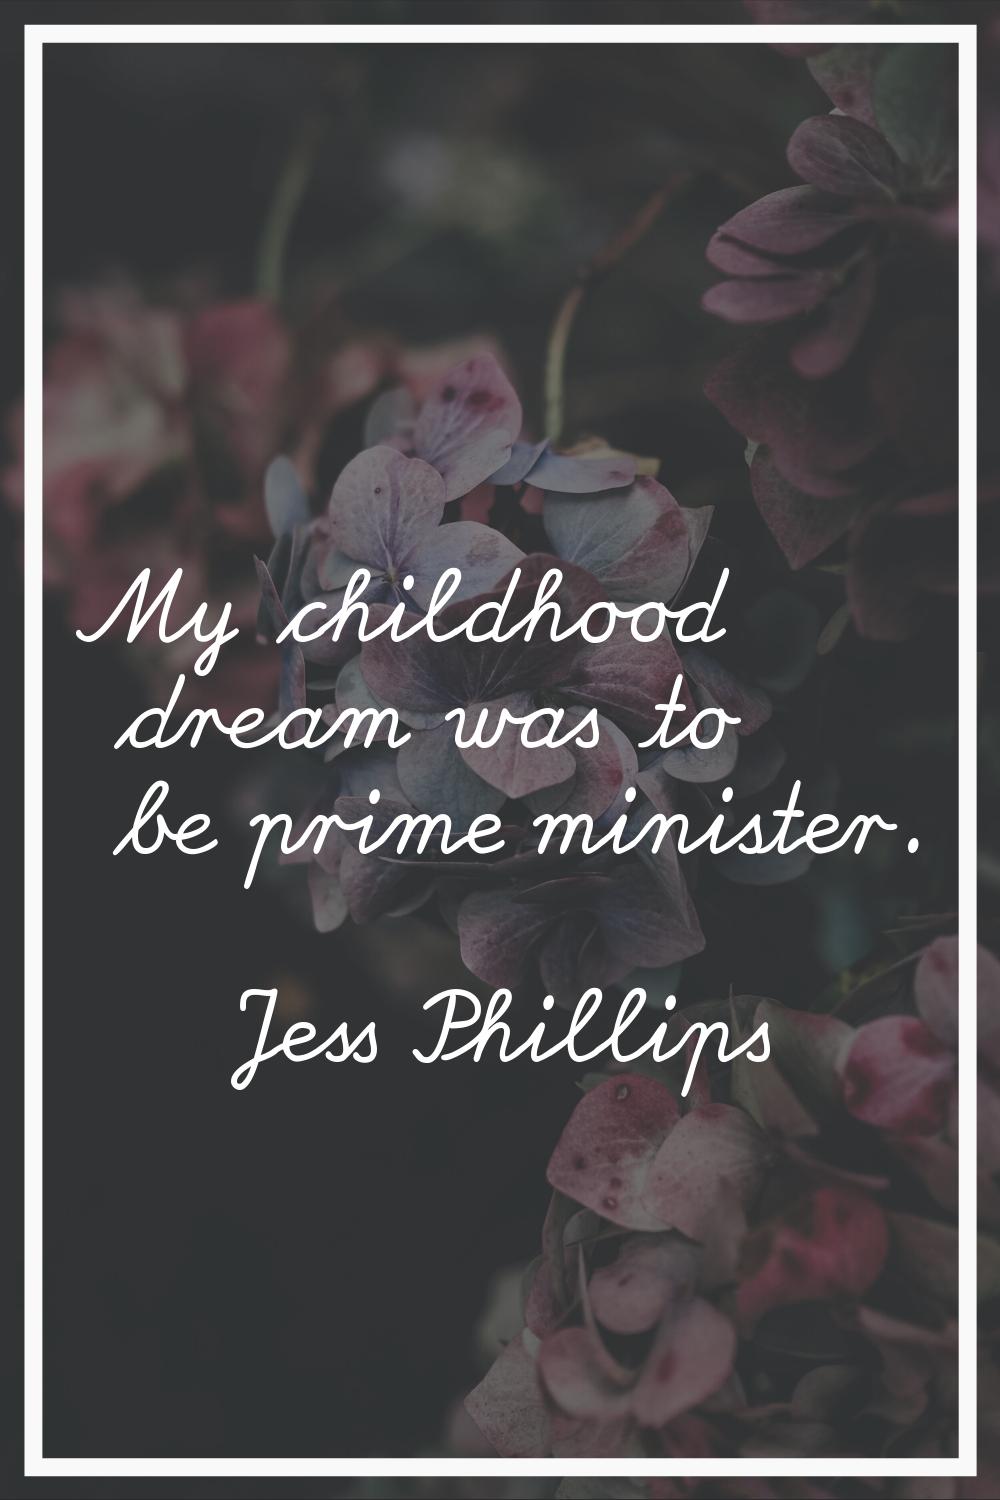 My childhood dream was to be prime minister.